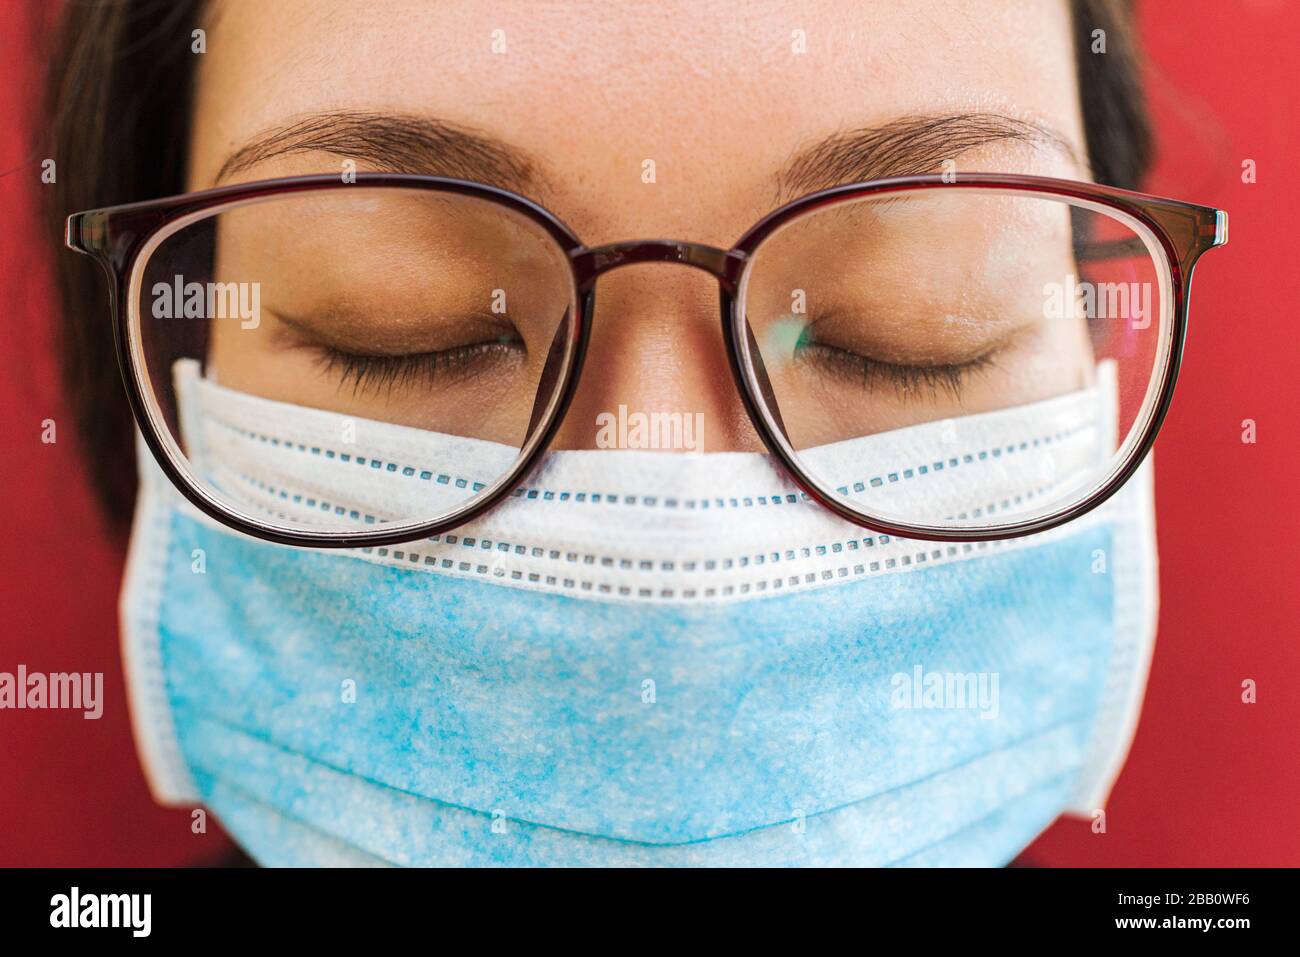 coronavirus theme. Asian woman with glasses wearing a mask to protect herself from getting infected Stock Photo